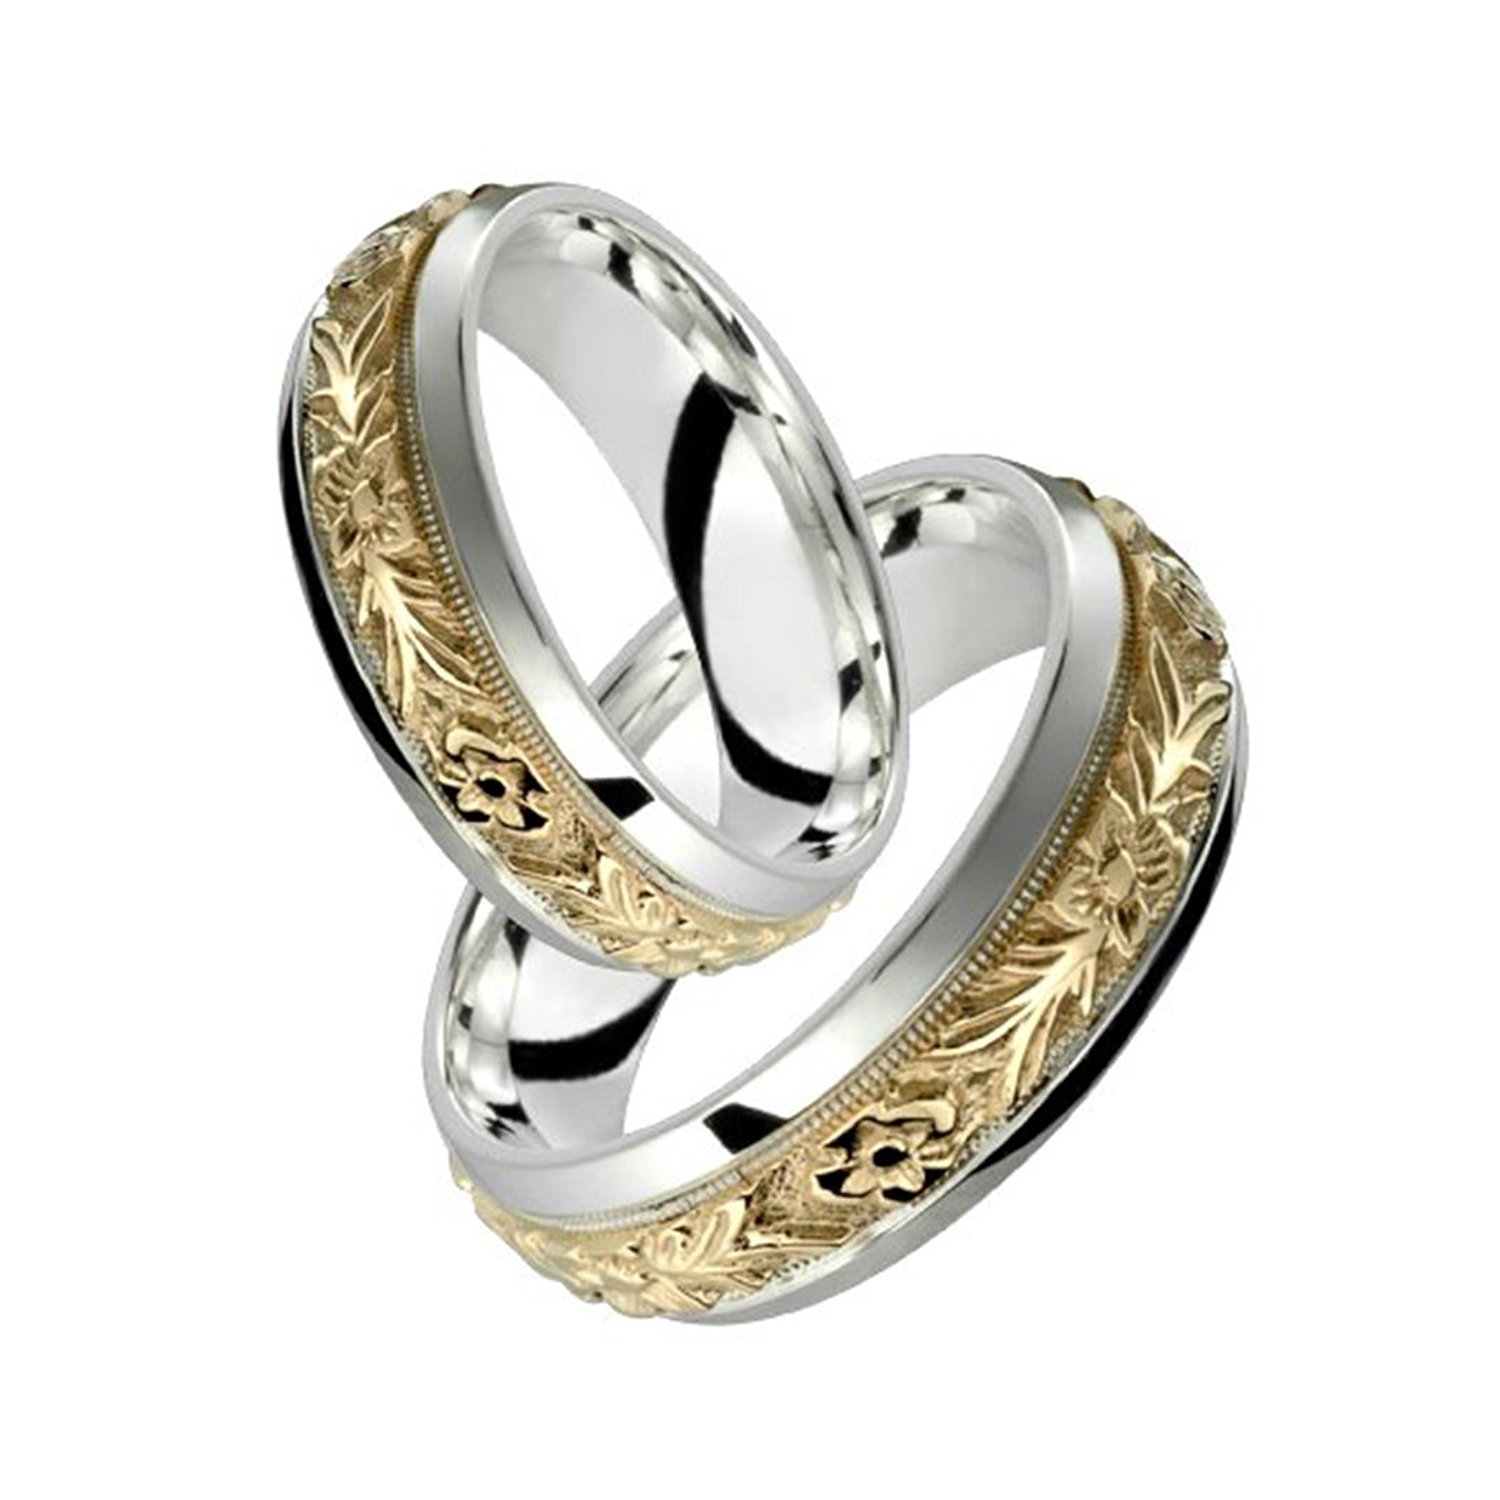 Amazon.com: Alain Raphael 2 Tone Sterling Silver and 10k Yellow Gold ...